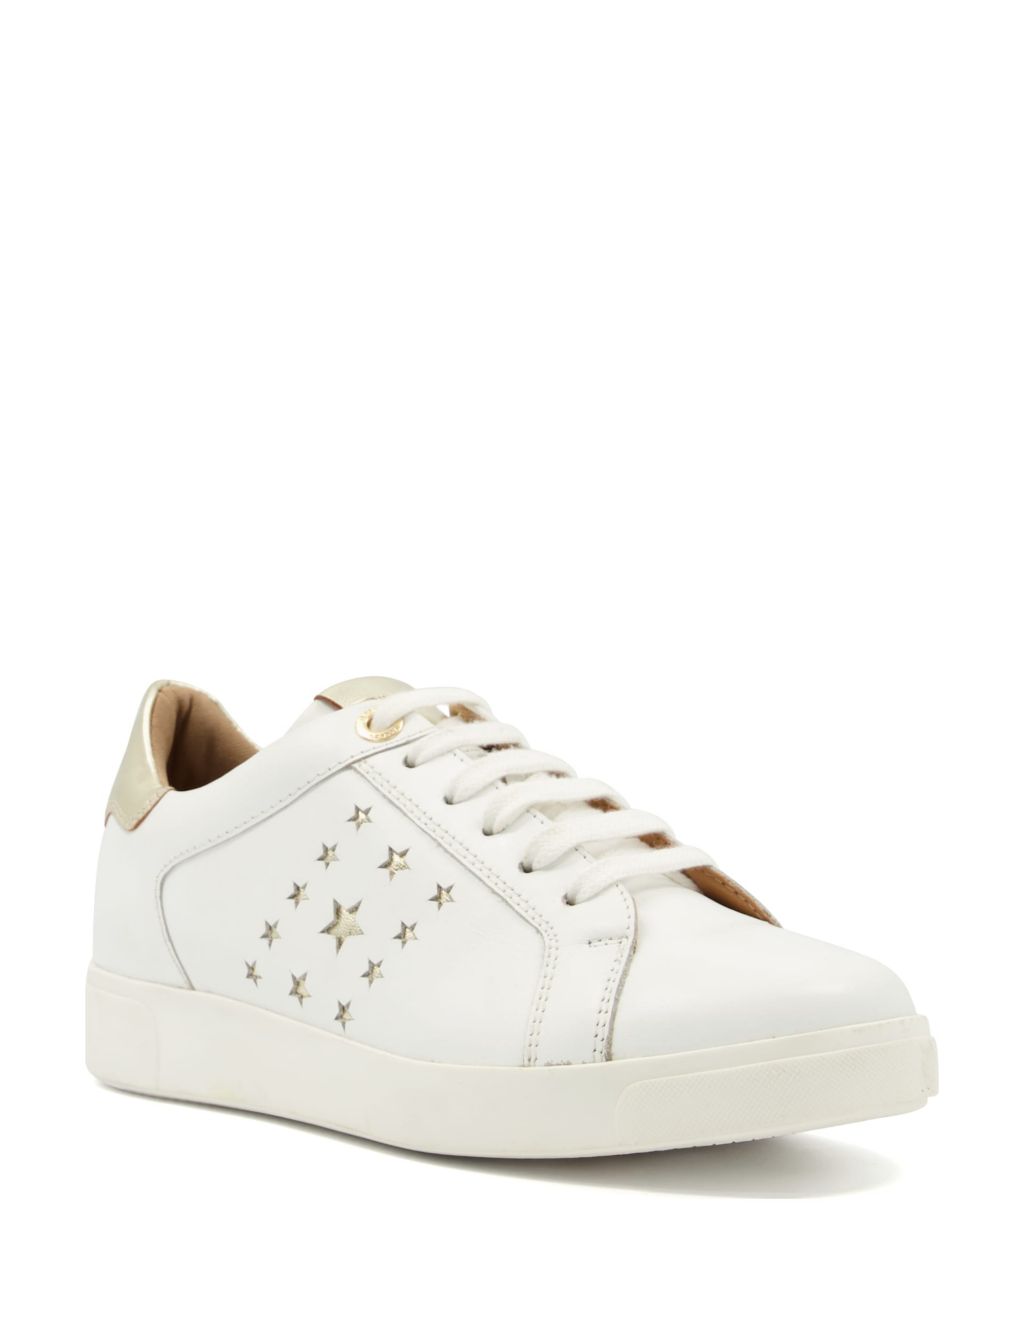 Leather Lace Up Star Trainers image 2